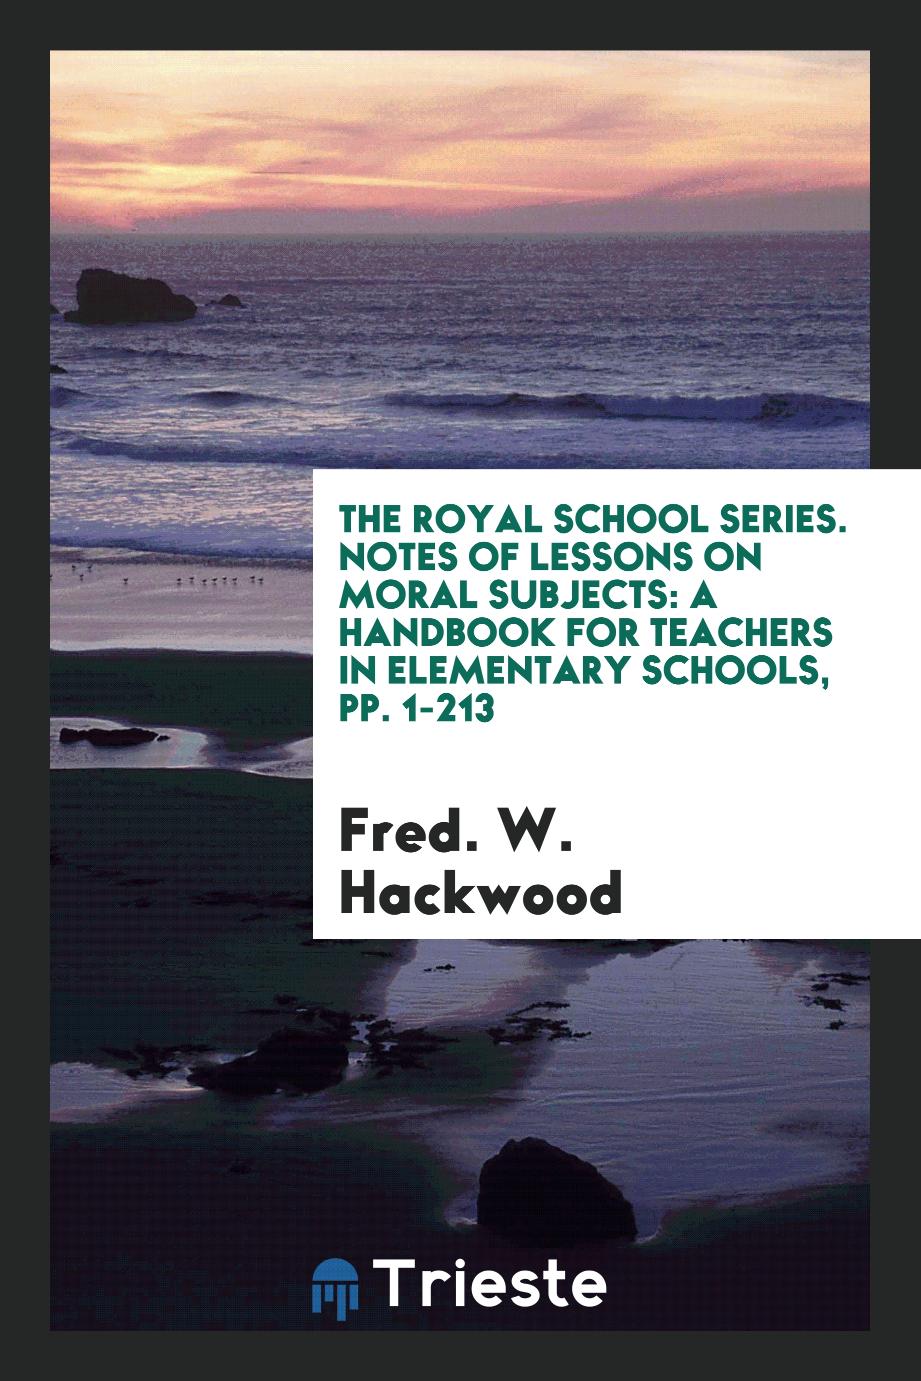 The Royal School Series. Notes of Lessons on Moral Subjects: A Handbook for Teachers in Elementary Schools, pp. 1-213